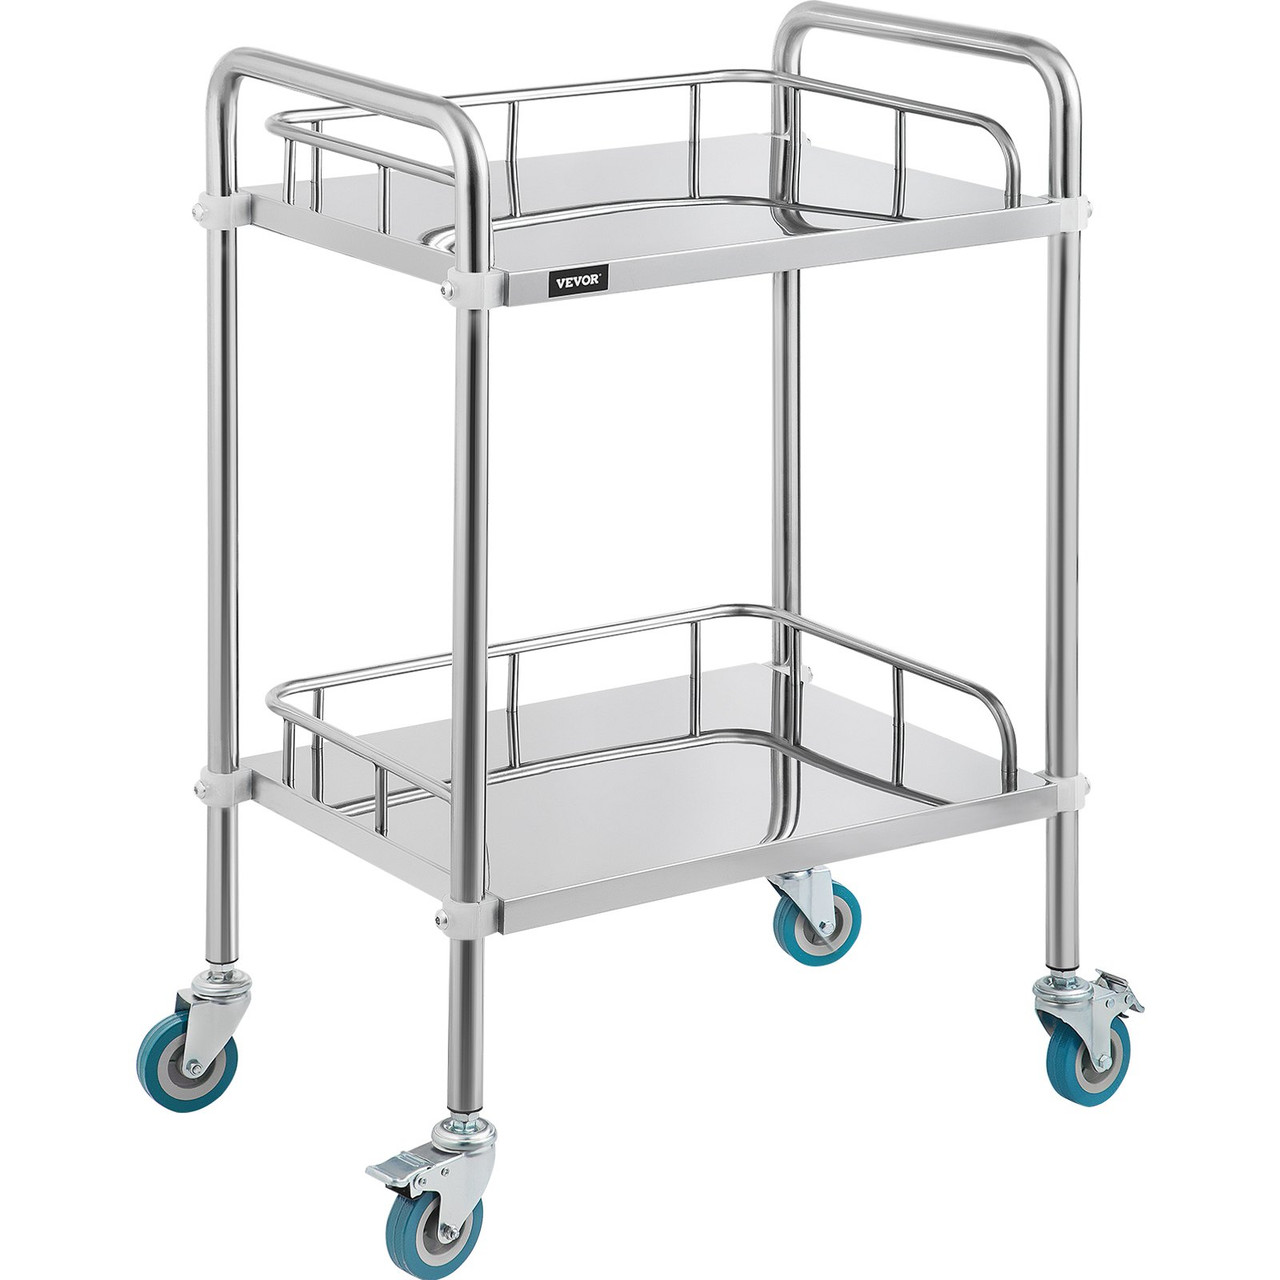 2-Shelf lab cart with Wheels Stainless Steel Rolling cart Lab Cart Utility Cart with high-Polish Stainless Steel 2 Lockable Wheels for Fixing